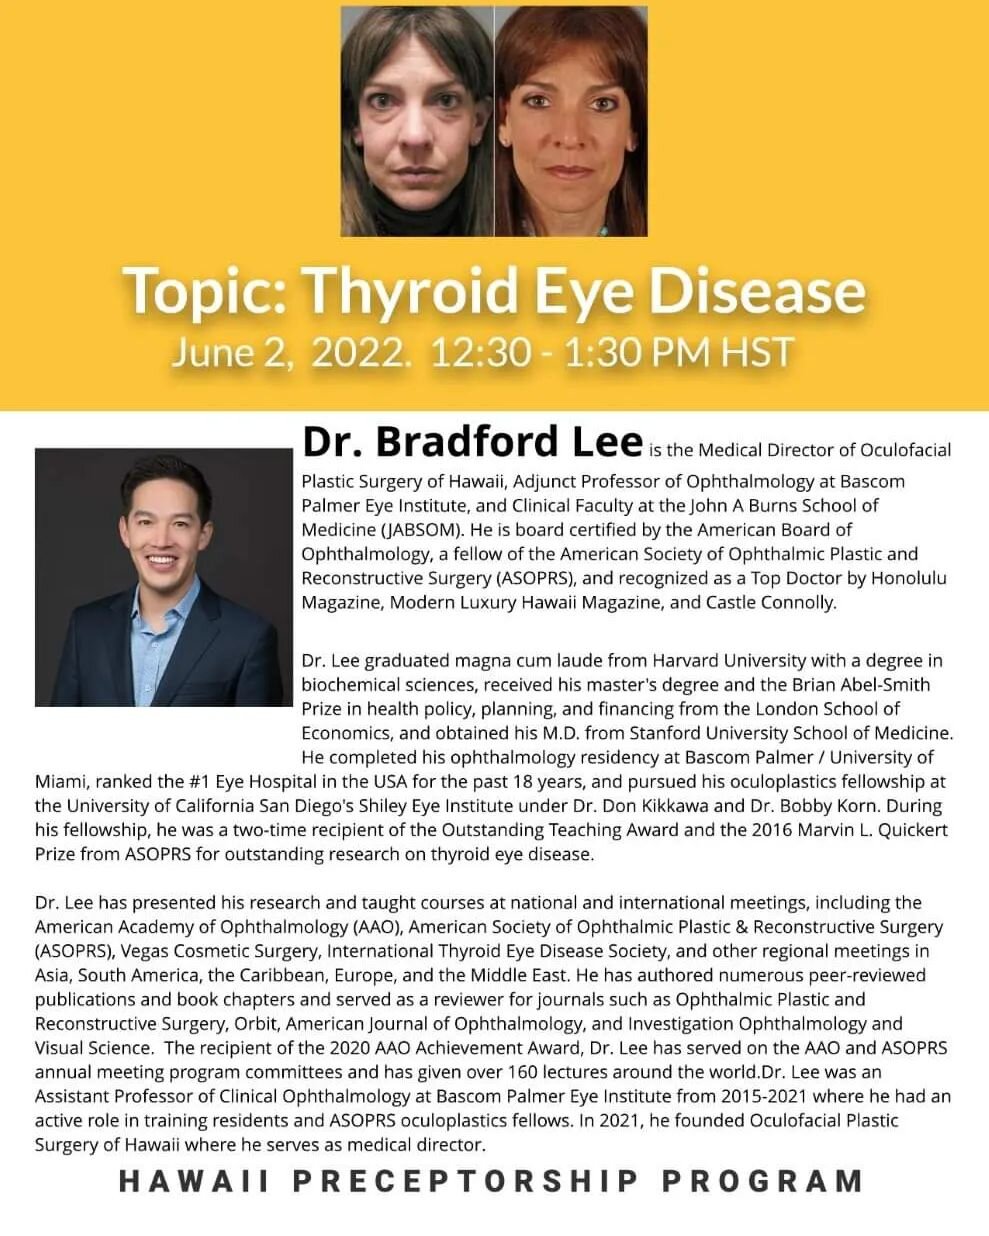 Excited to learn from our guest lecturer, Dr. Bradford Lee! 

Our lecture series is exclusive to the program. Check our highlights to find out how to apply! 

#preceptorship #usce #medicalstudent #premed #img #fmg #ecfmg #clinicalexperience #precept 